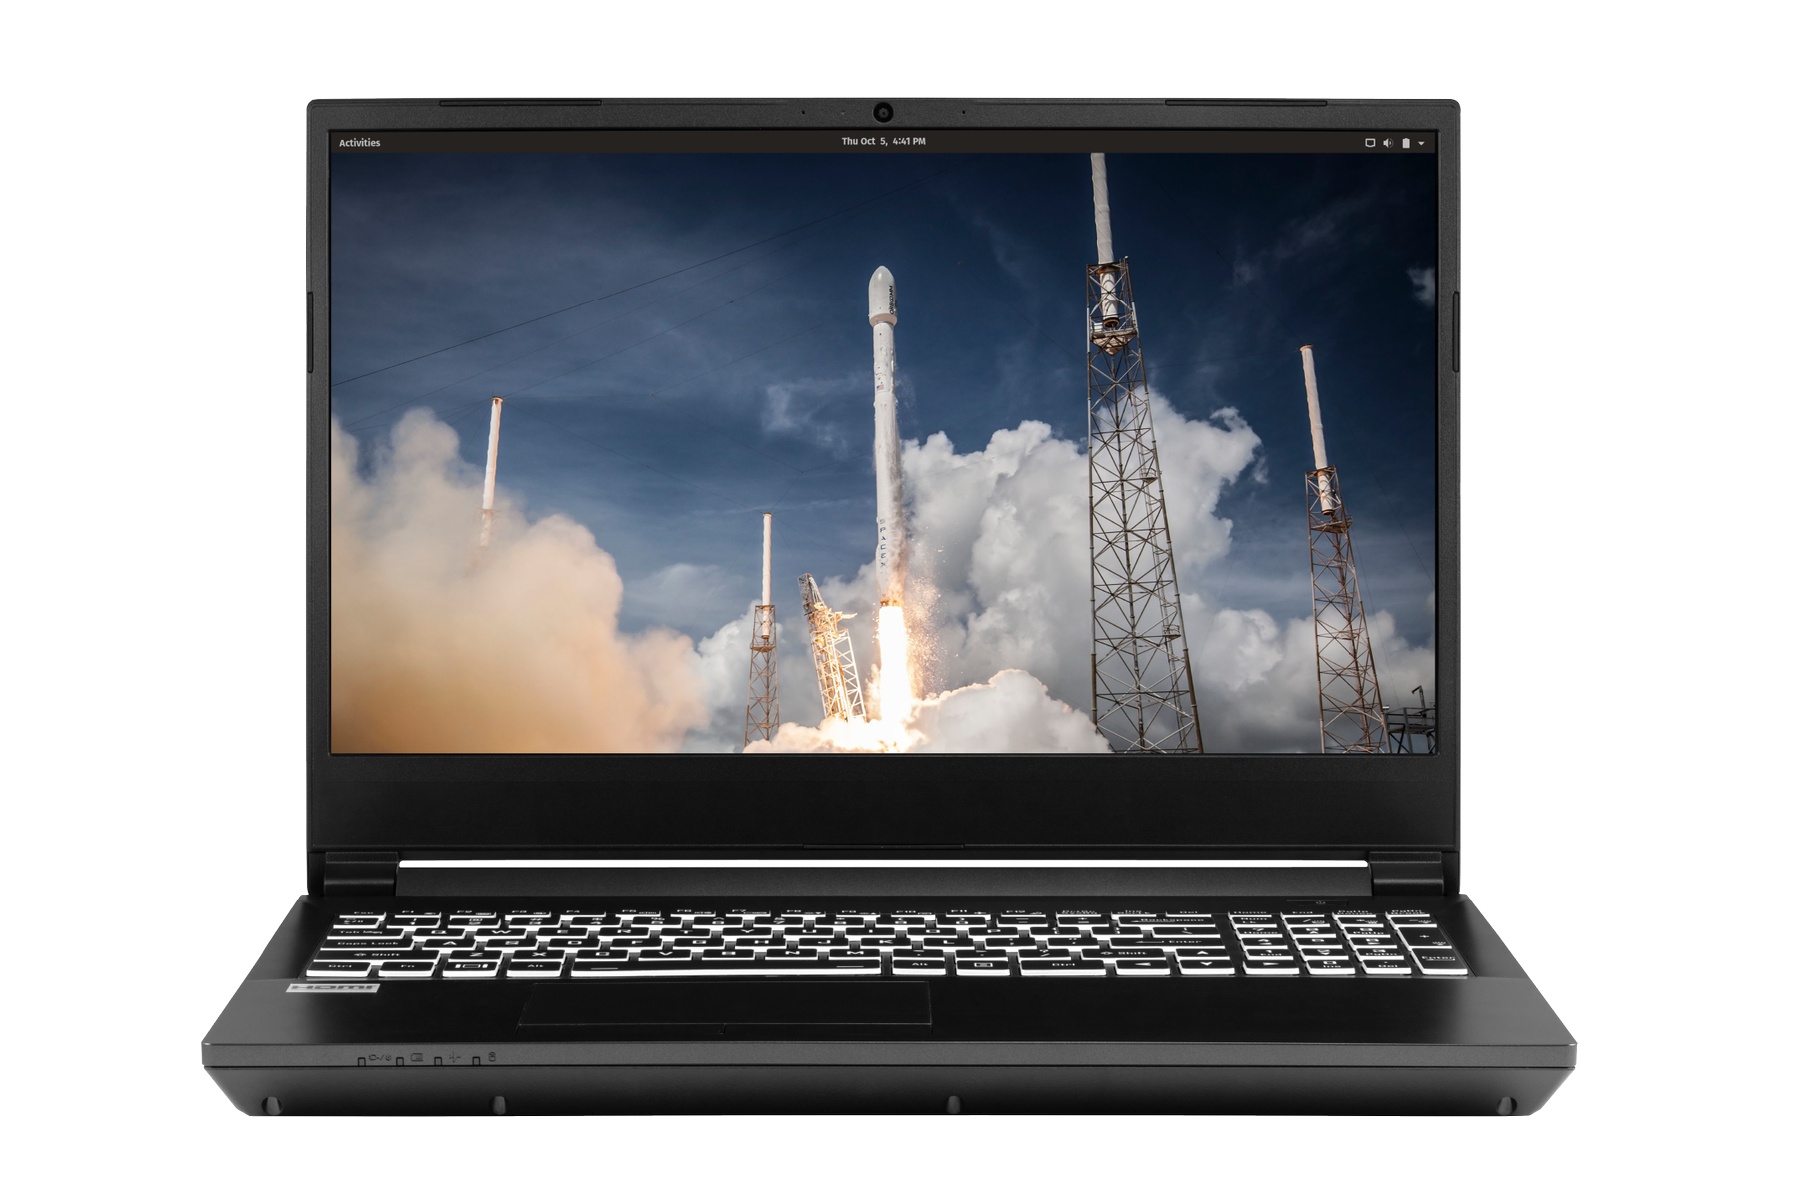 System76 Launches Their First Ever AMD Powered Linux Laptop